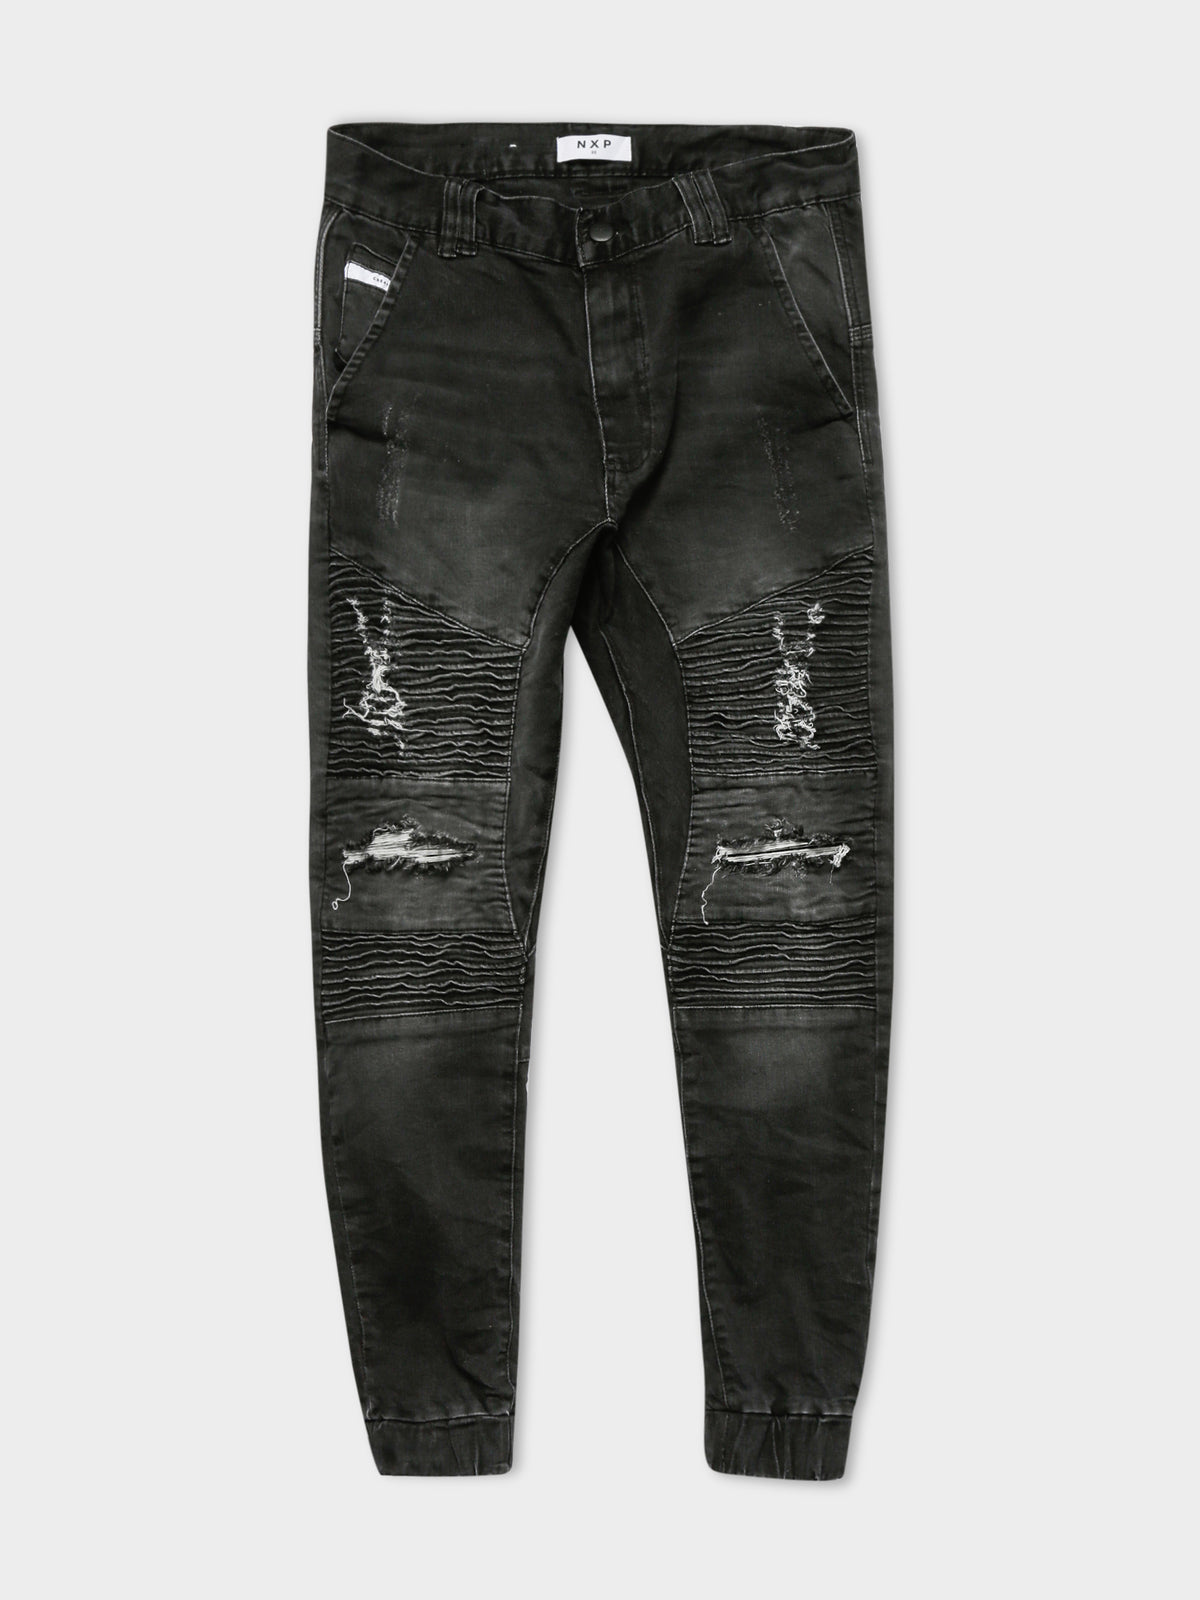 Hellcat Tight Tapered Jeans in Heavy Metal Black